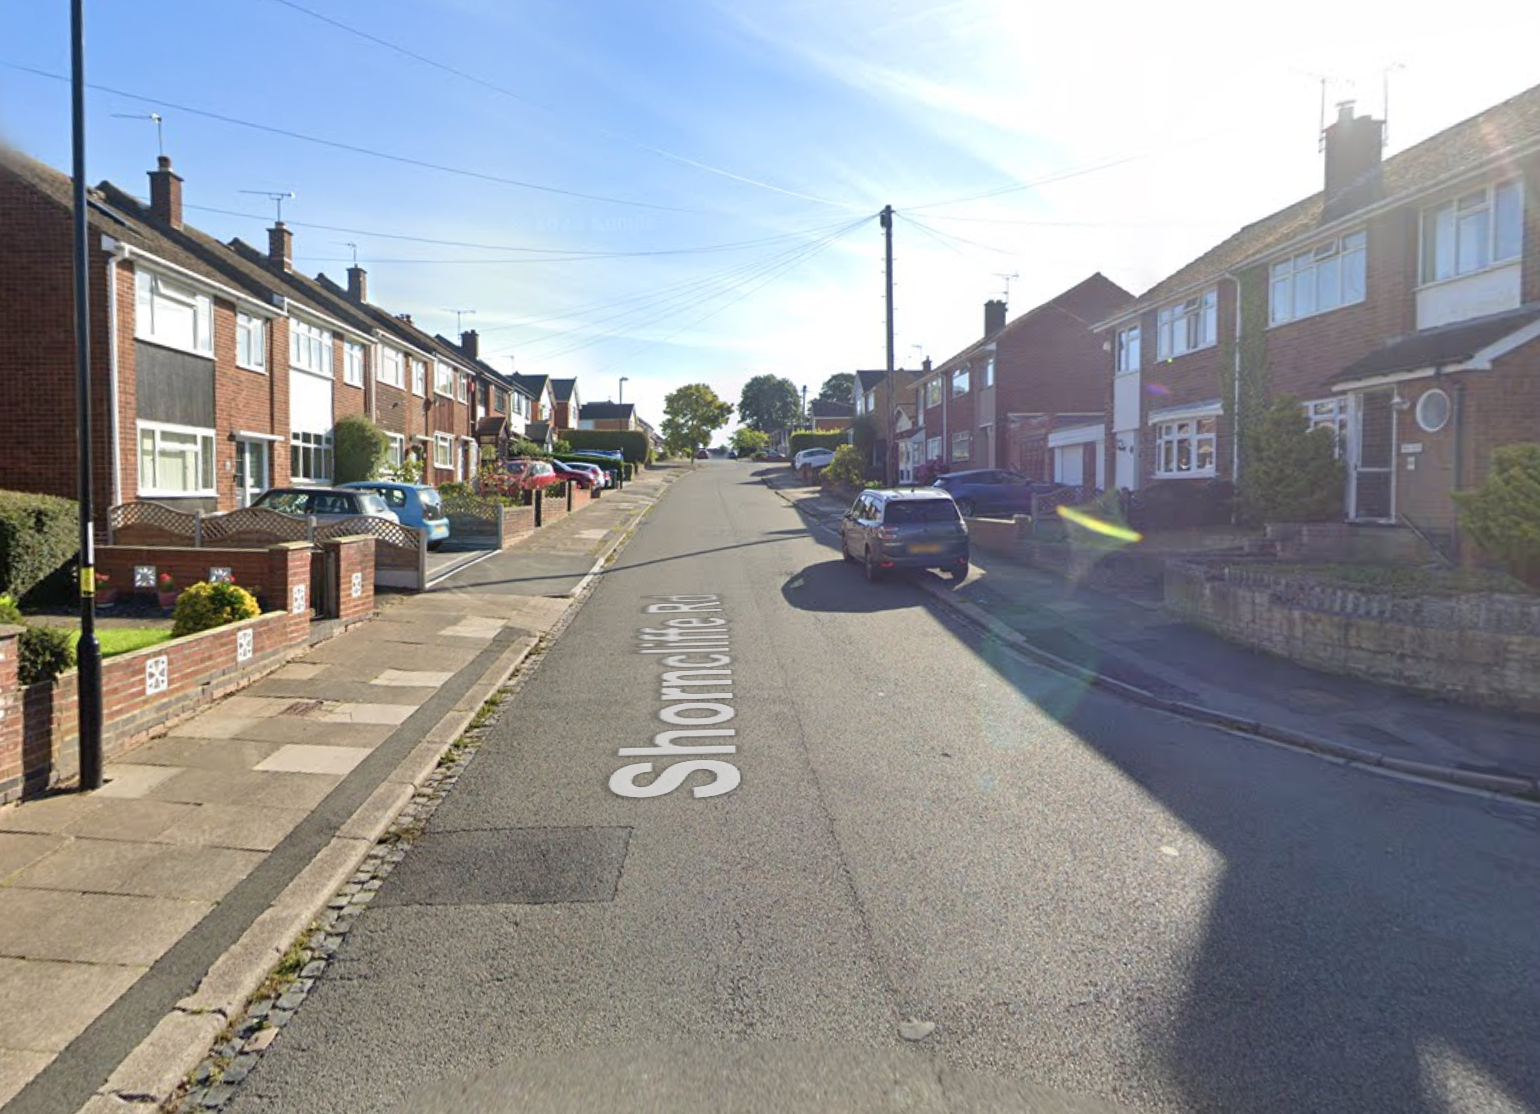 The seven-month-old was mauled to death inside her home on Shorncliffe Road, Coventry, on Sunday